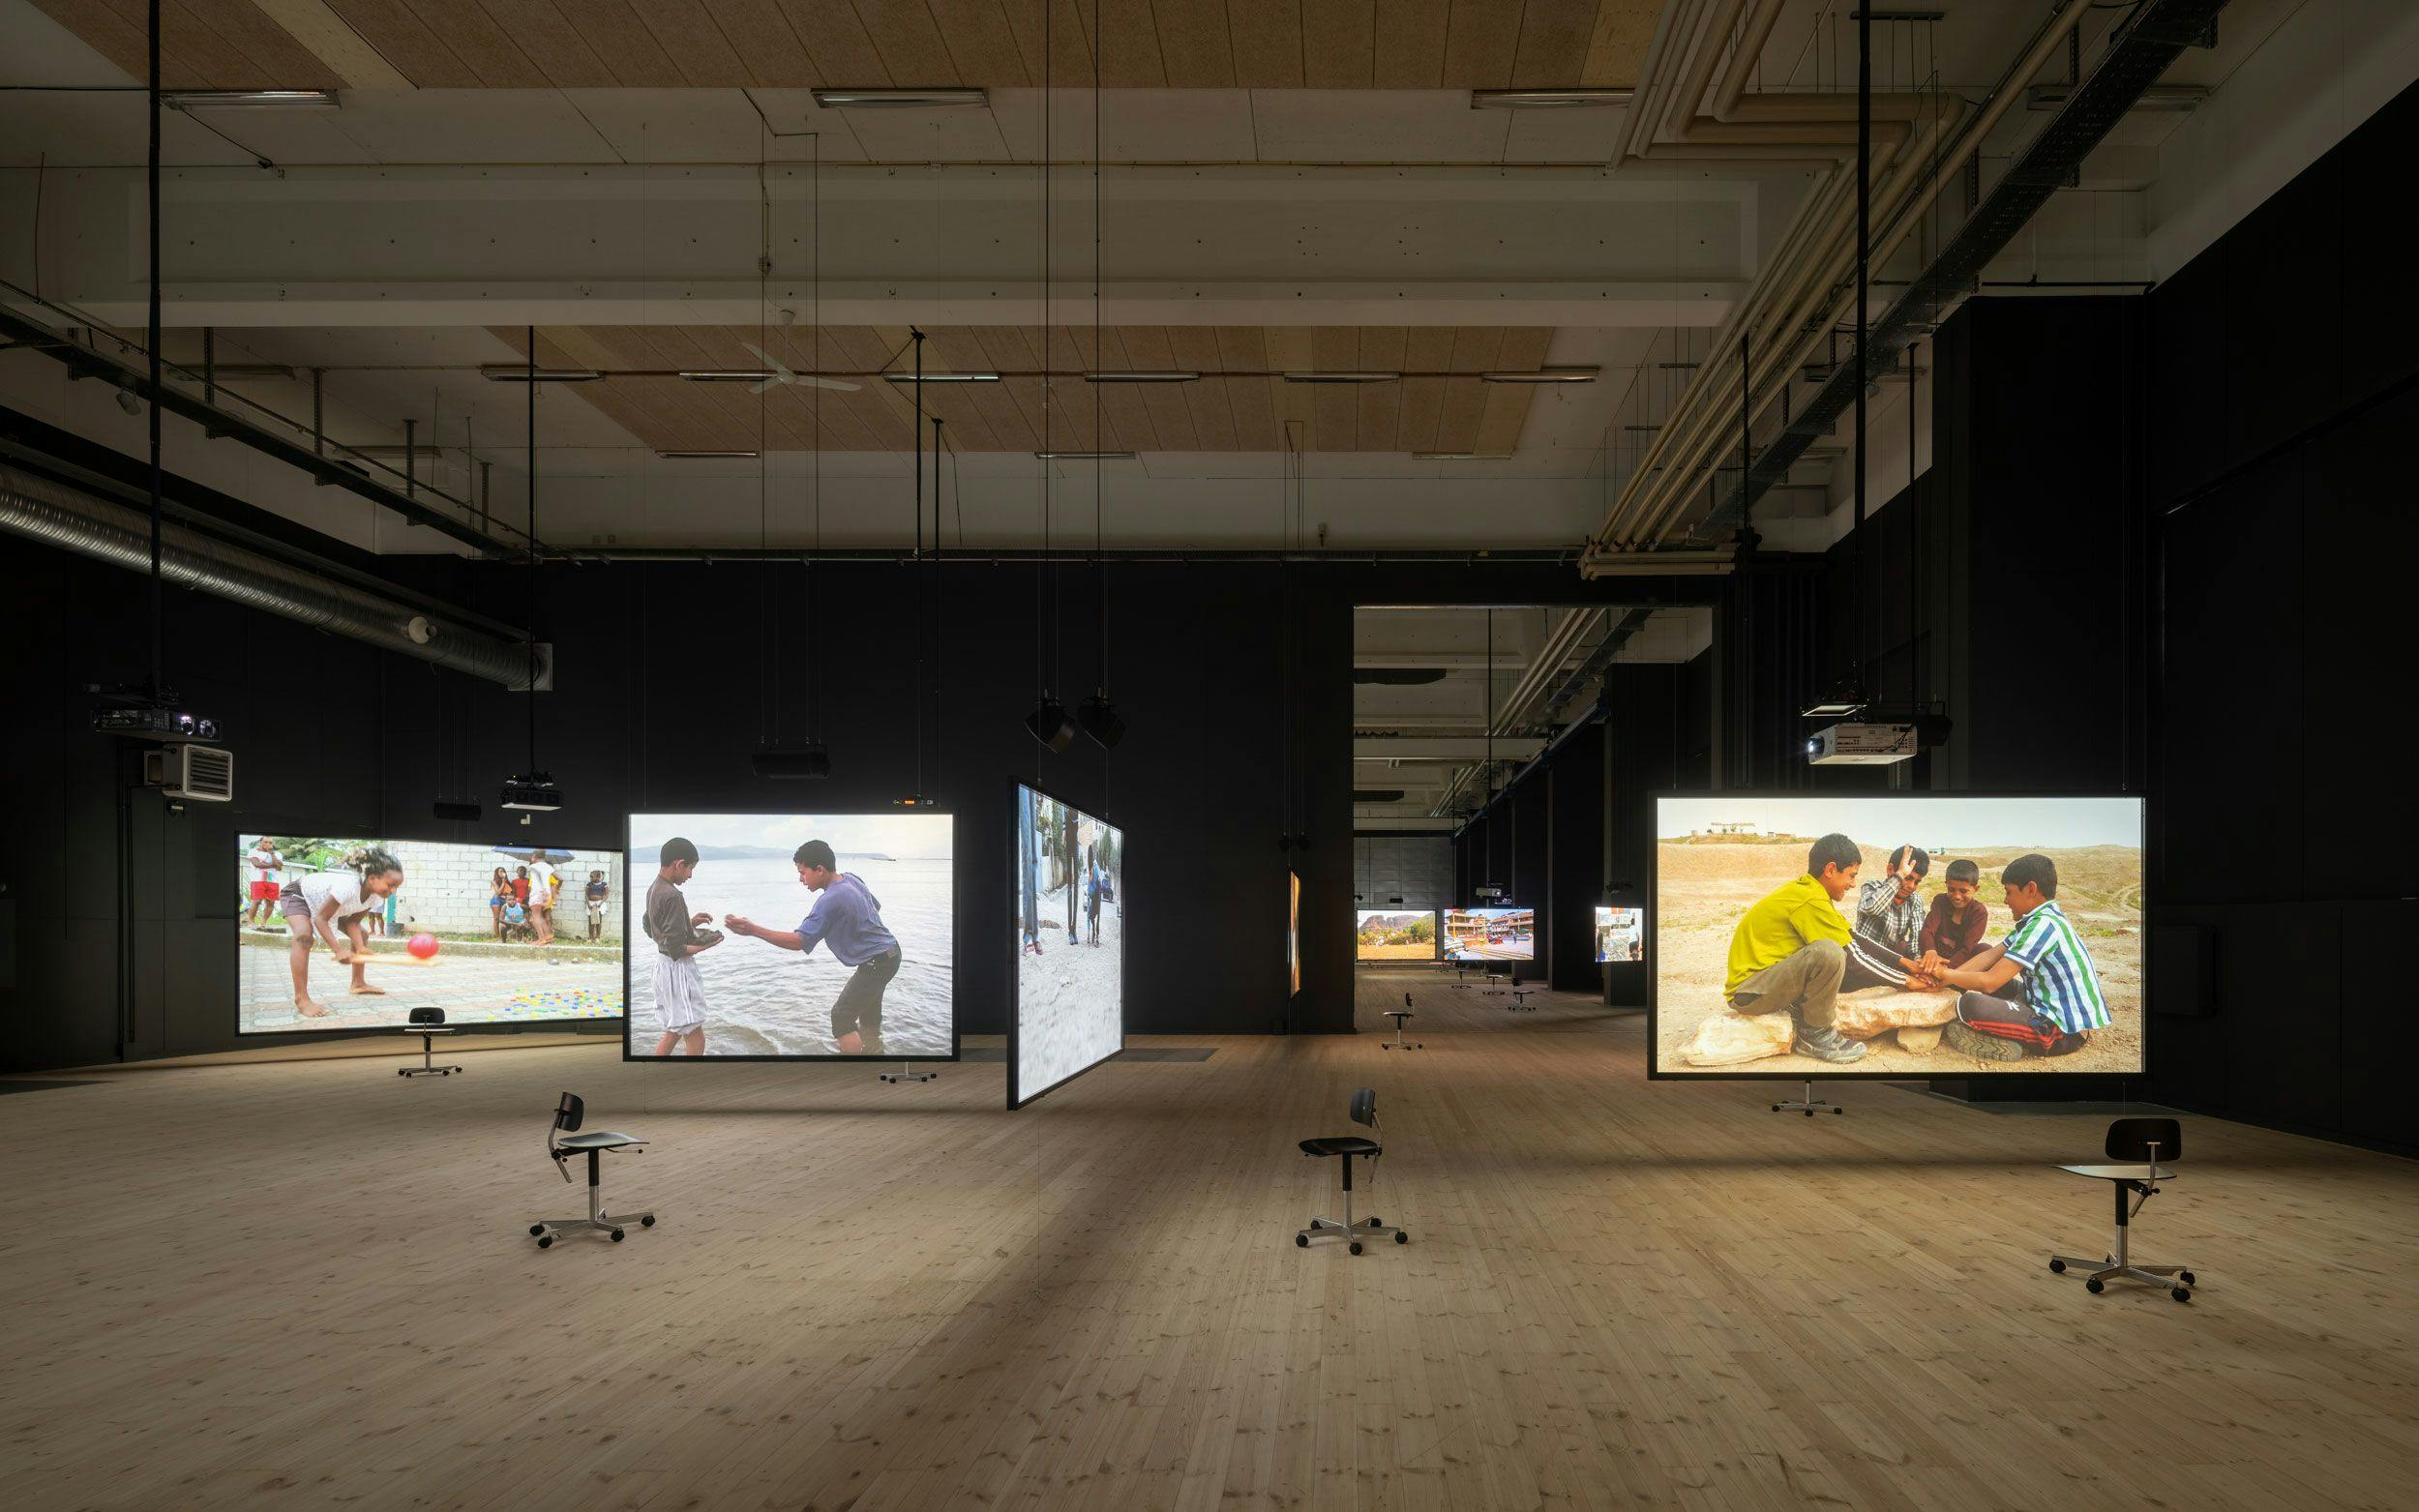 An installation by Francis Alÿs, titled Children's Games, 1999 to Present. 